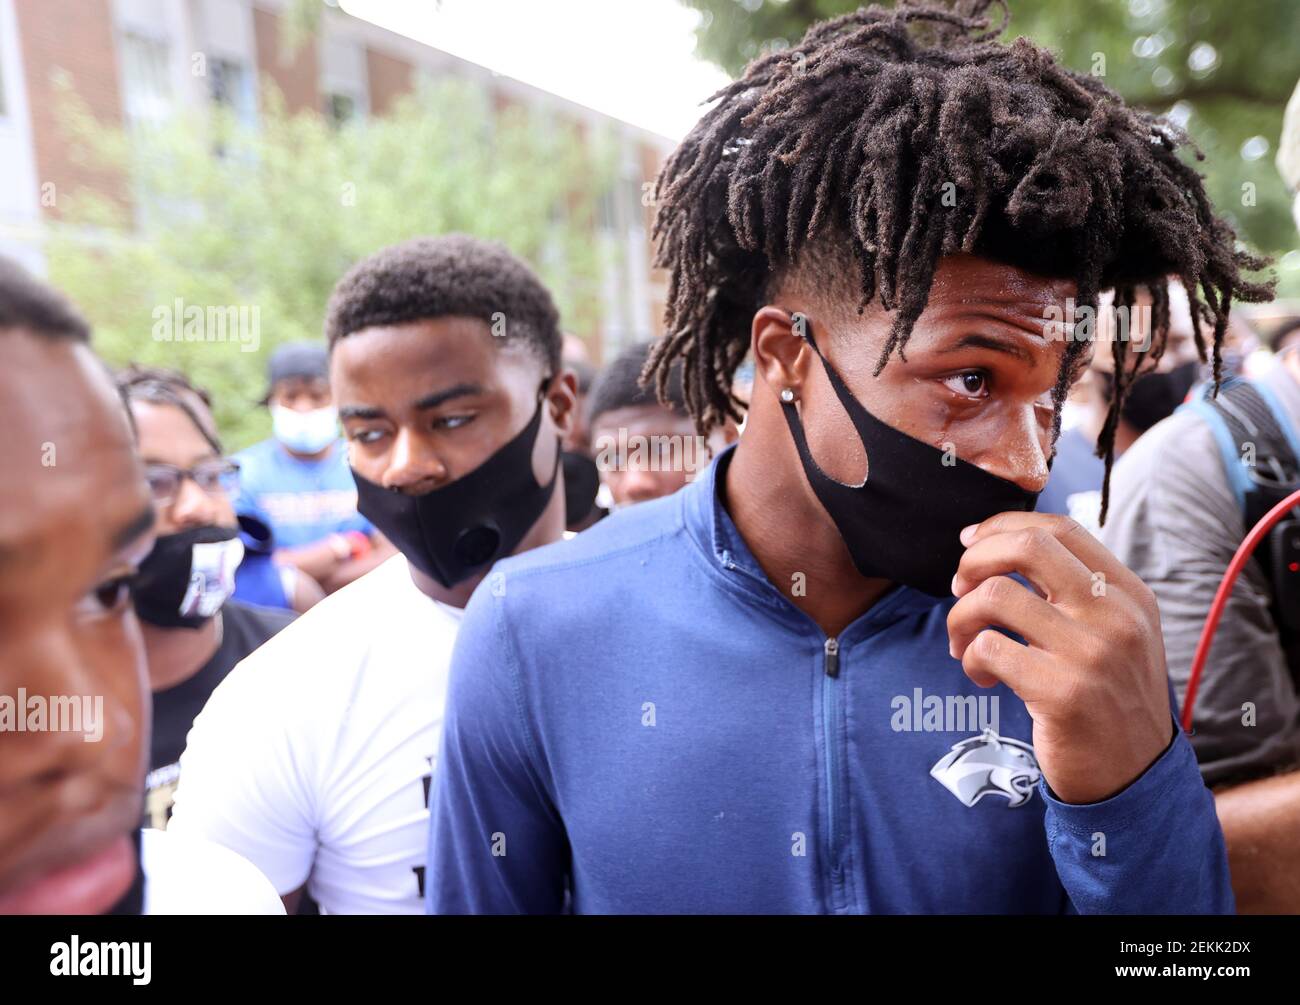 Kaleb Almo sheds a tear as he talks about losing his mother to cancer and how football has become one of the things in his life that helps him stay positive, as he joins fellow student athletes gathered outside the Shelby County Board of Education offices to protest the decision to postpone fall sports in the district on Wednesday, September 16, 2020 in Memphis, TN. Jrca5520 (Photo by Joe Rondone/The Commercial Appeal/USA Today Network/Sipa USA) Stock Photo